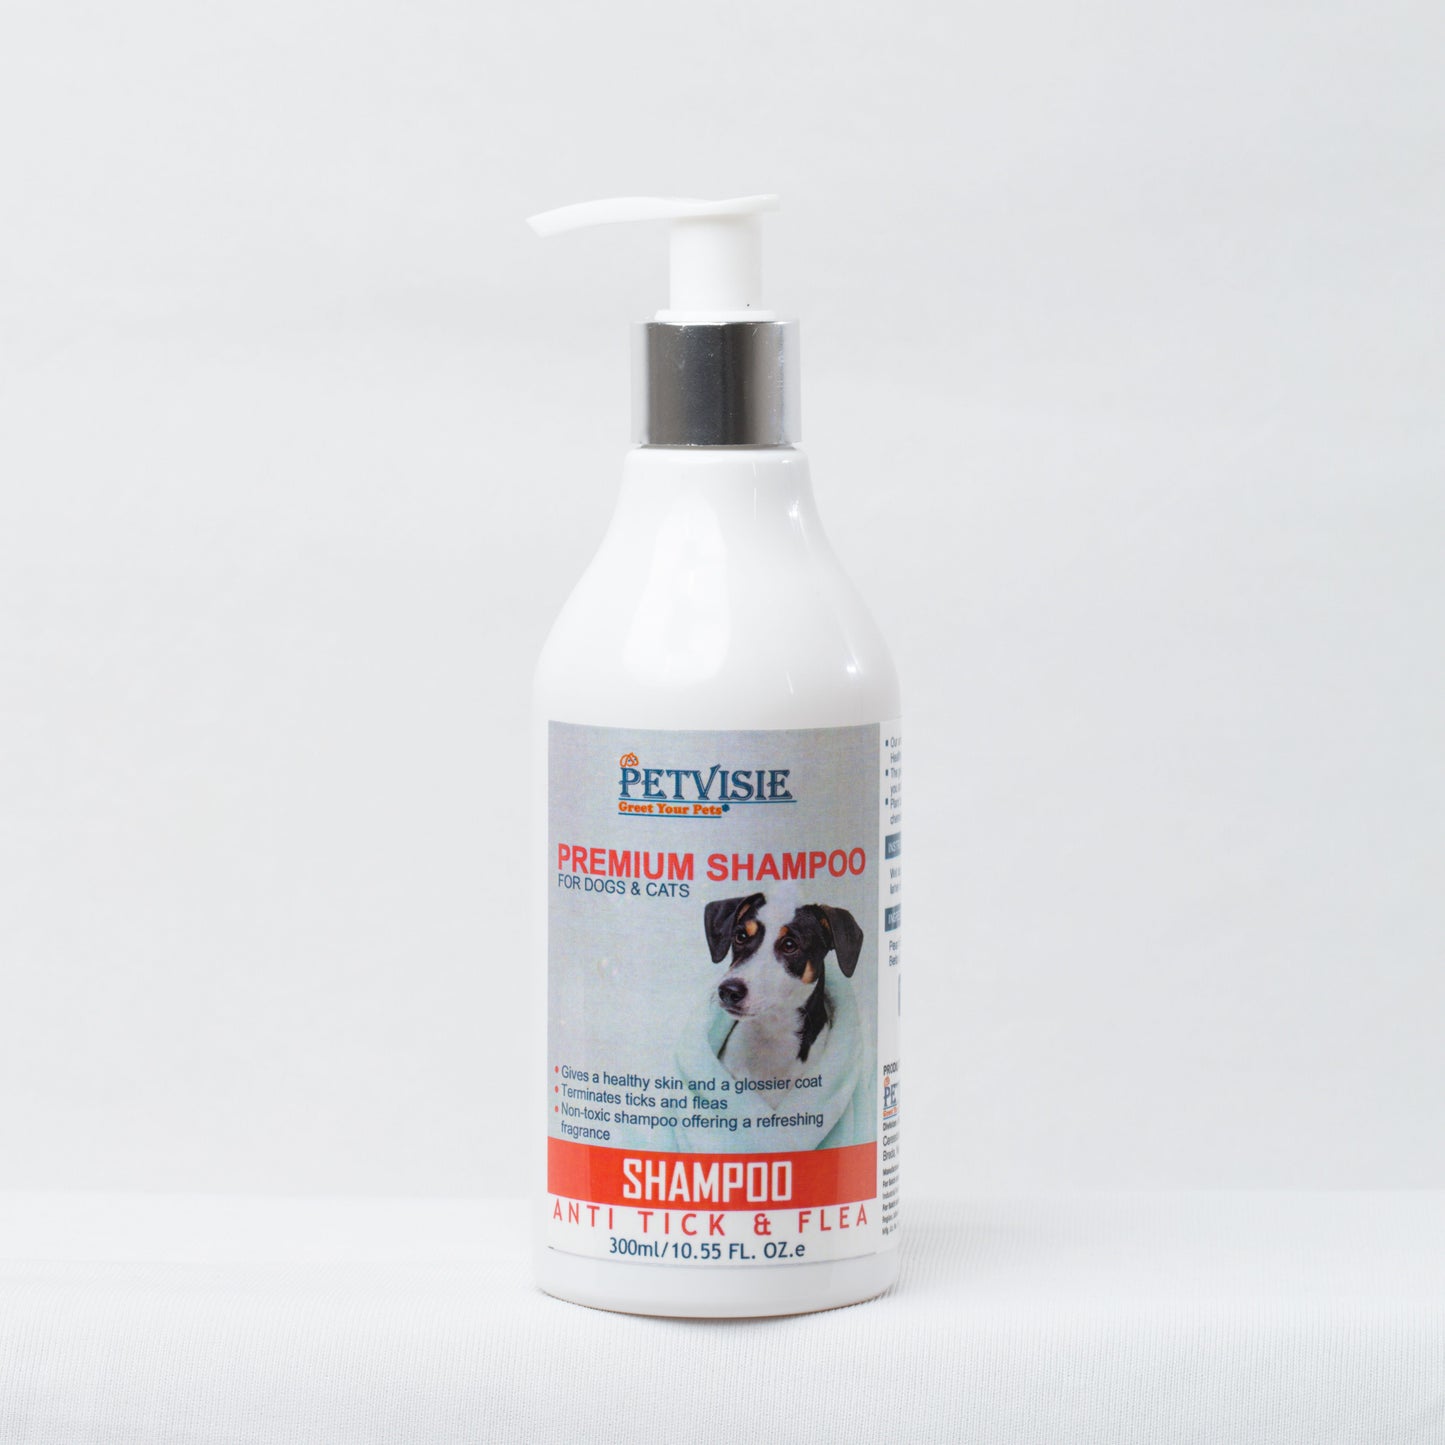 Petvisie - Natural Anti Tick and Flea shampoofor Dogs & Cats - 250gm